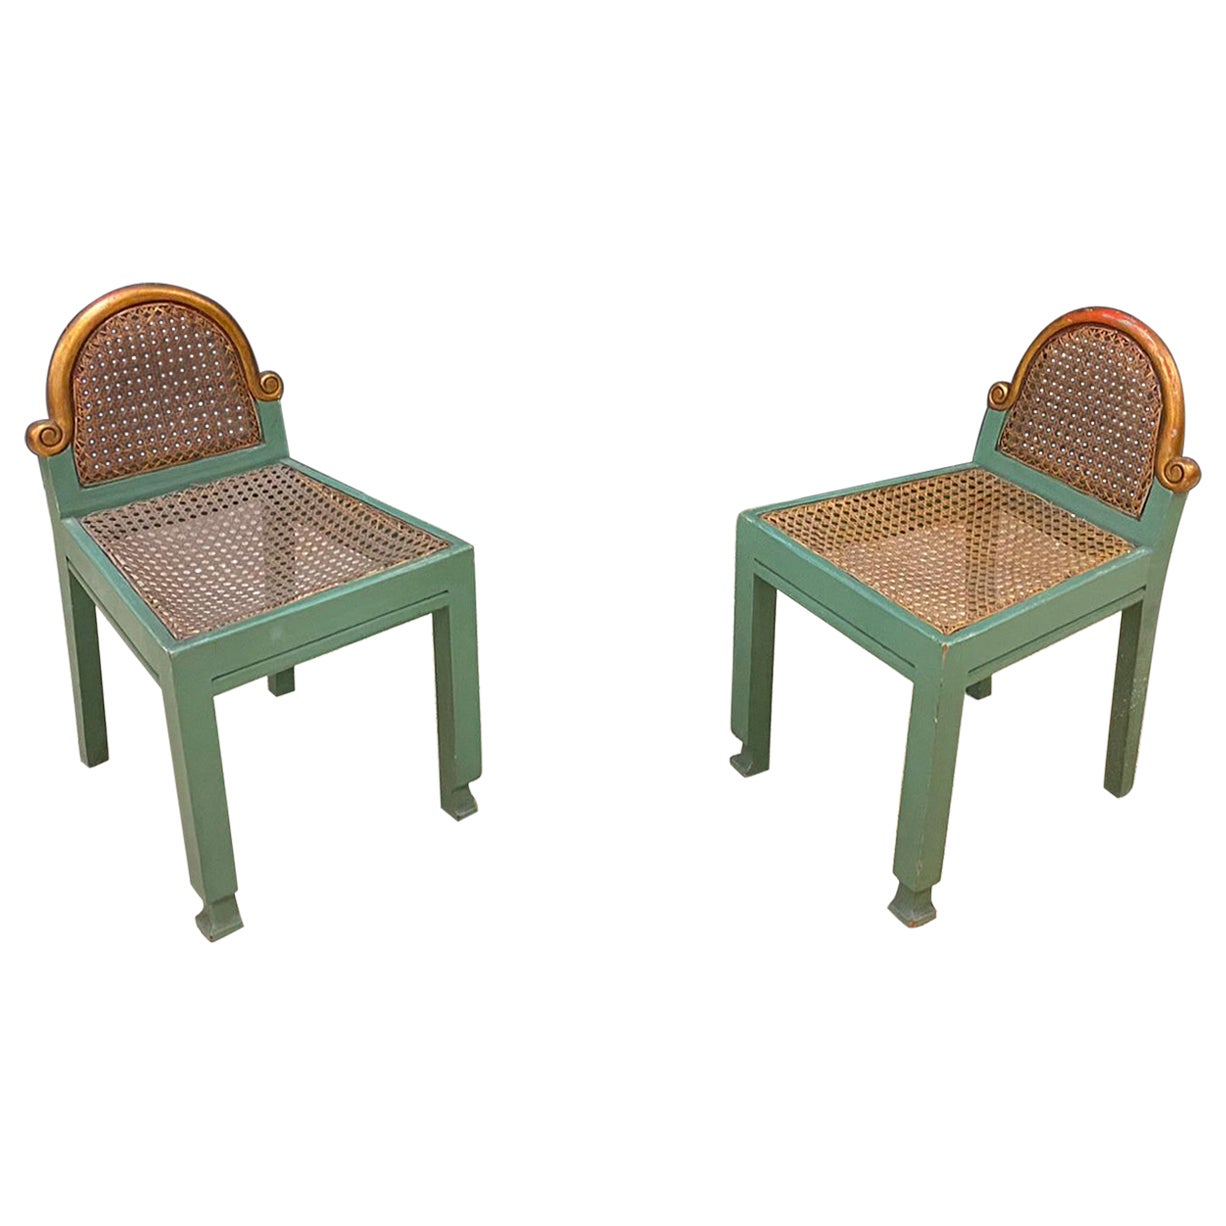 Pair of Small Modernist Chairs in Lacquered Beech and Cane, Belgium circa 1925